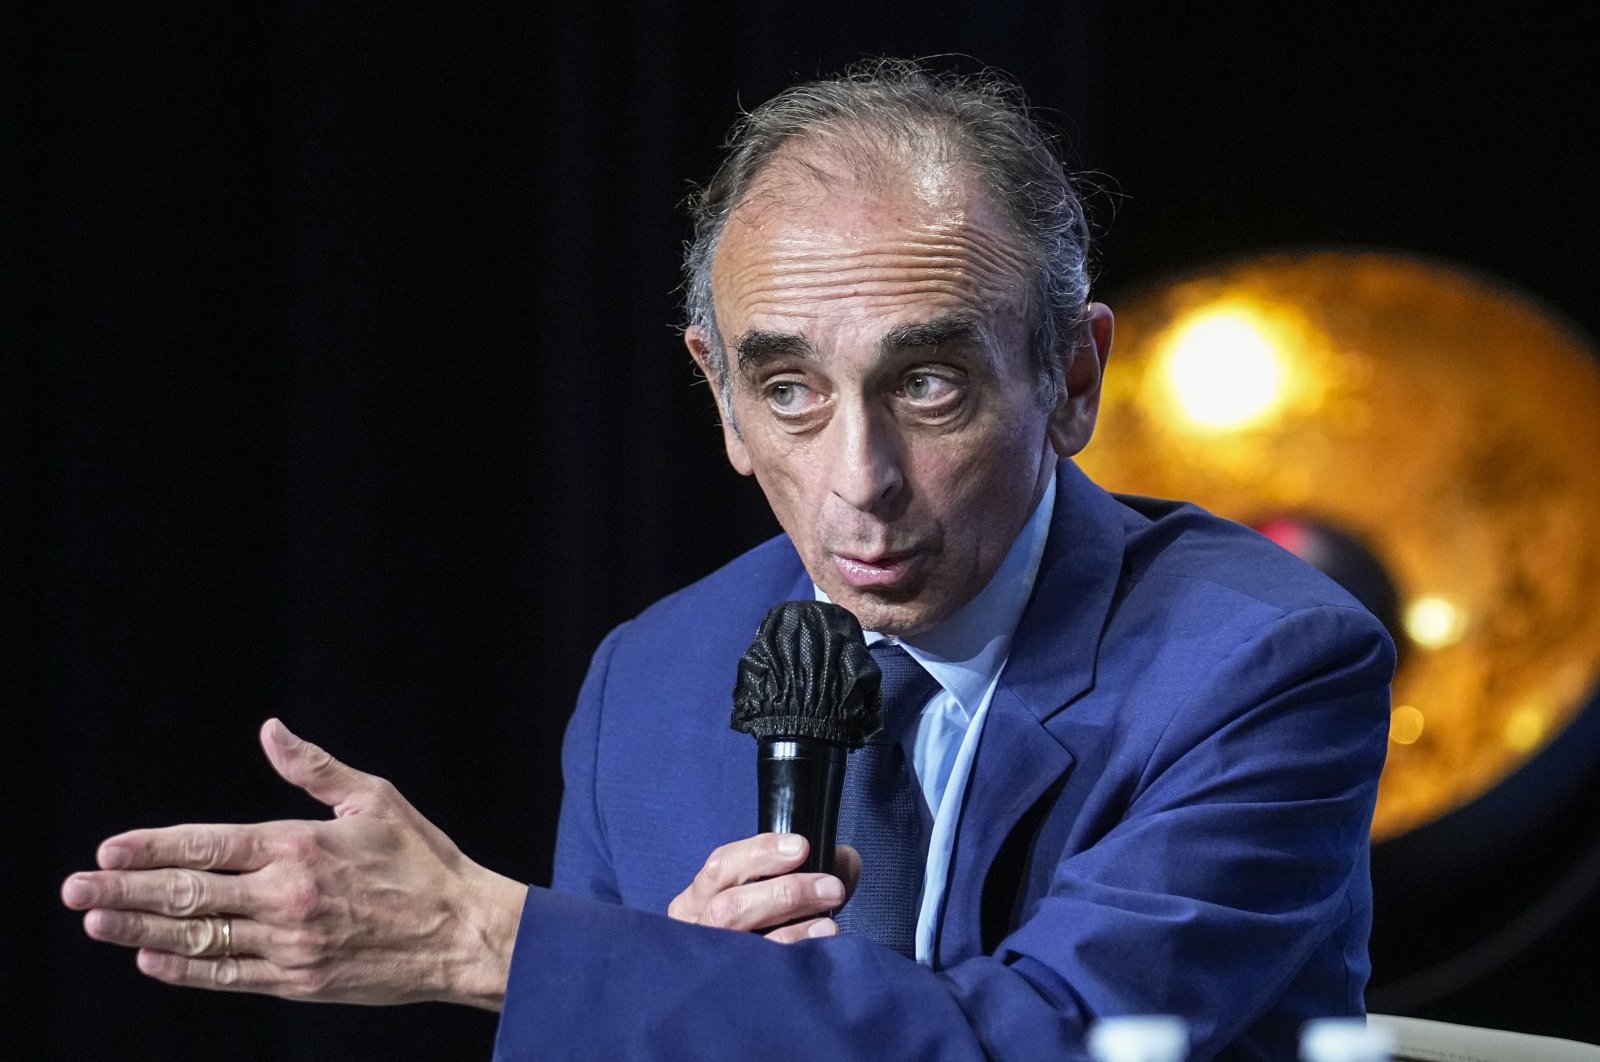 Hard-right political talk-show star Eric Zemmour gestures as he talks during a meeting to promote his latest book "La France n'a pas dit son dernier mot" (France has not yet said its last word) in Versailles, west of Paris, France, Oct. 19, 2021. (AP Photo)